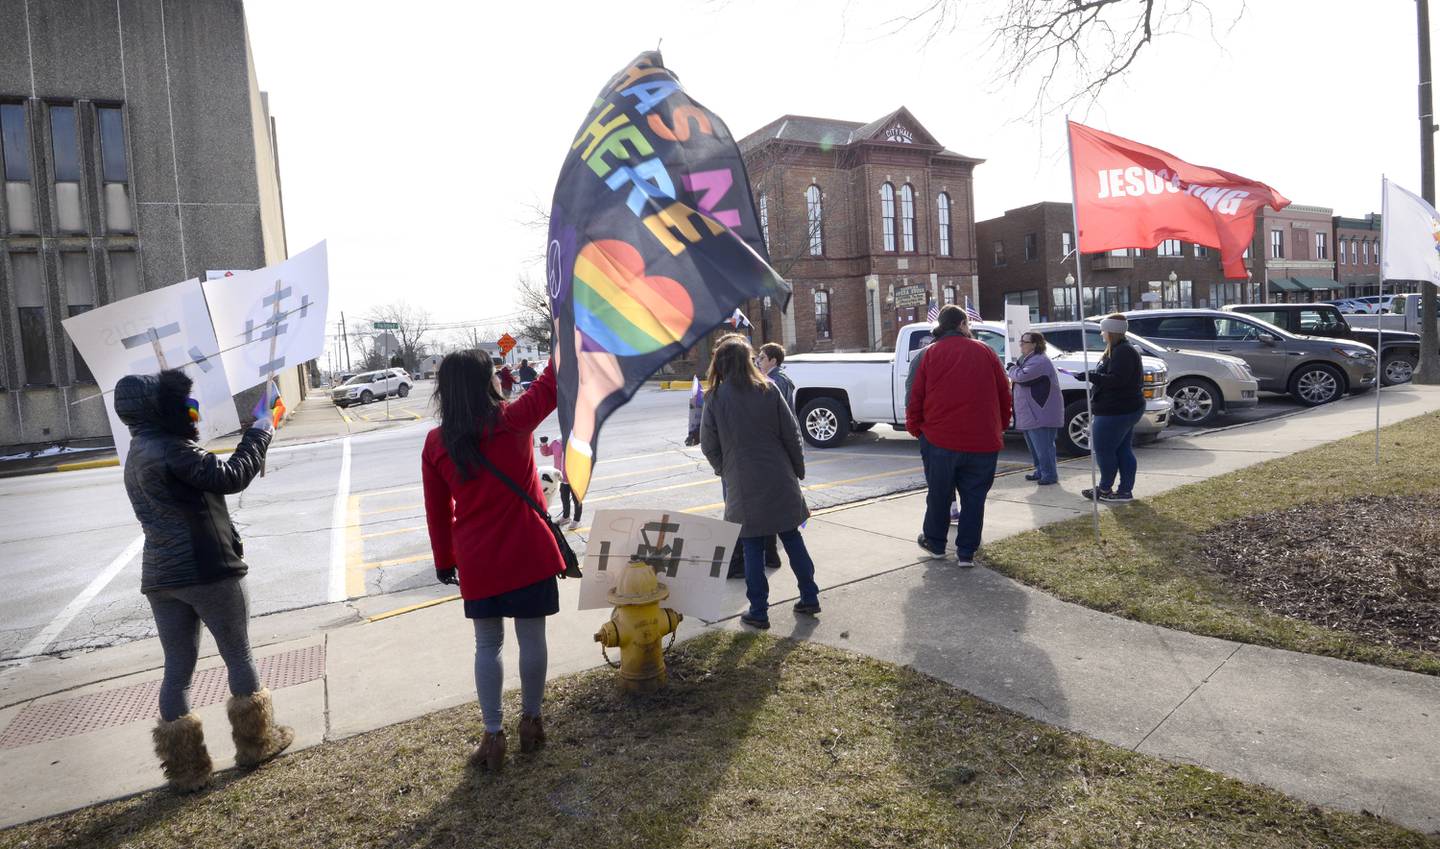 Both protesters and counter-protesters gathered in front of the Sandwich Opera House as a drag show took place on Saturday, Feb. 18, 2023.